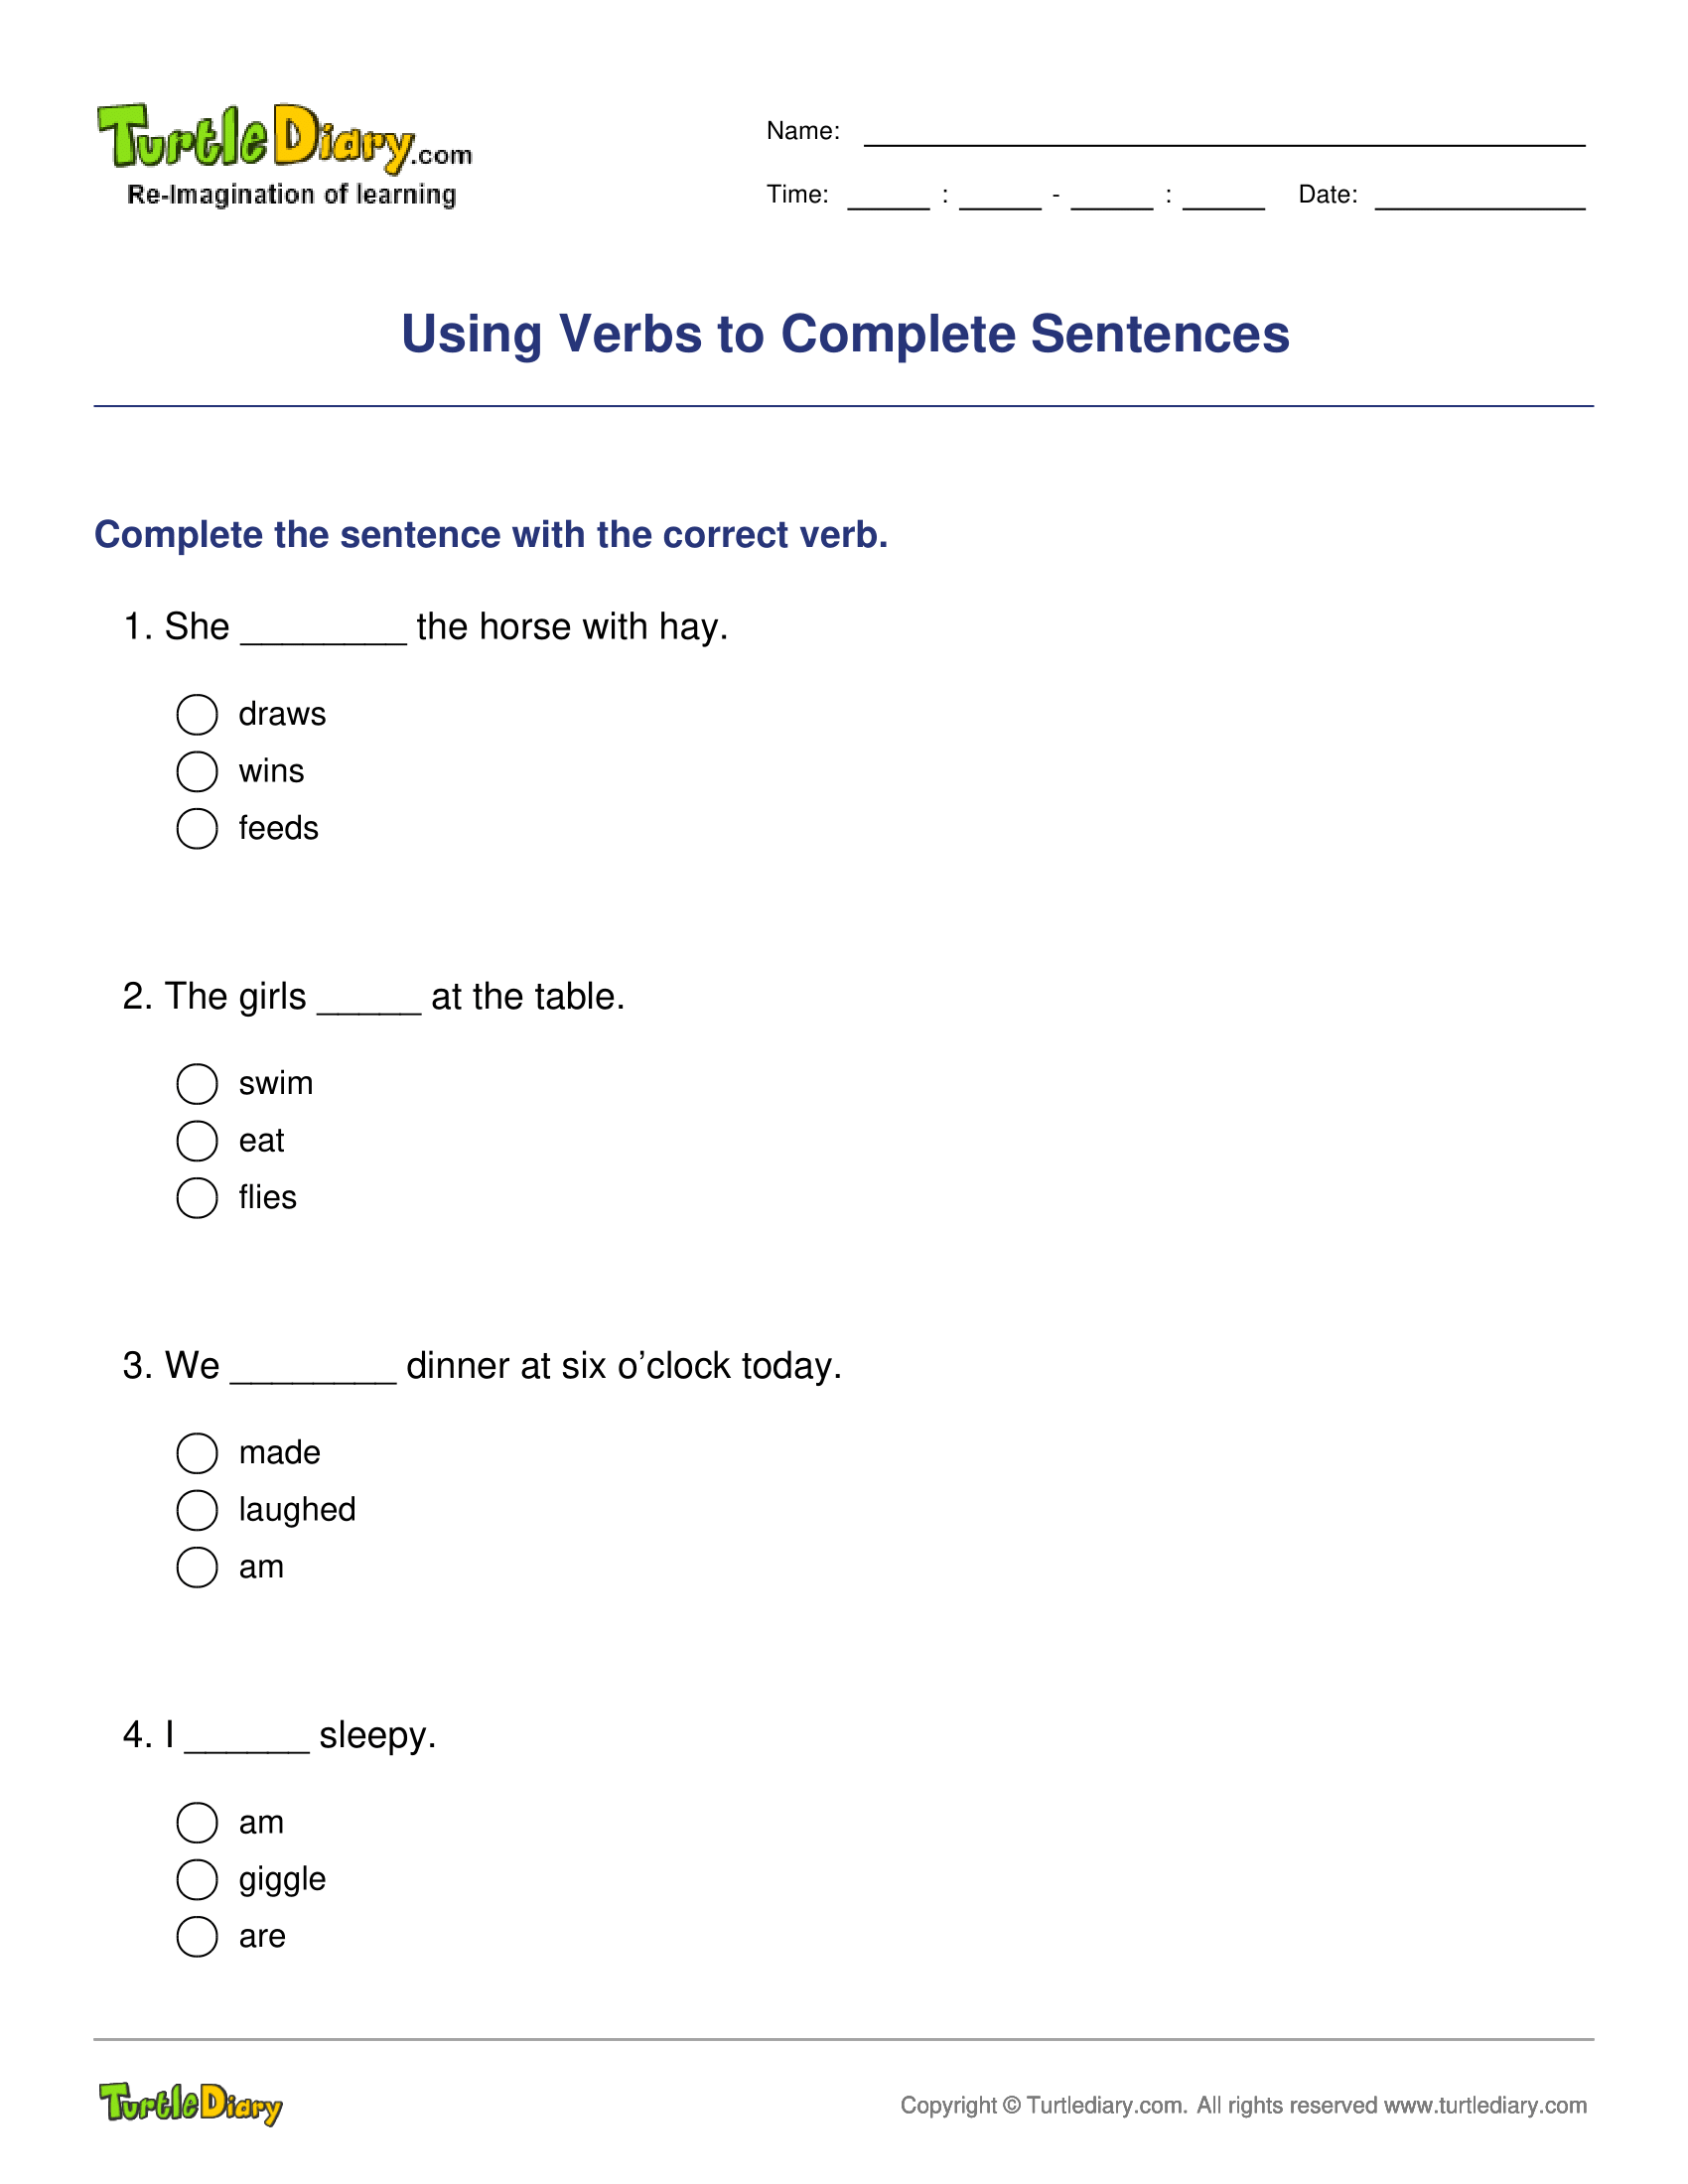 Using Verbs to Complete Sentences